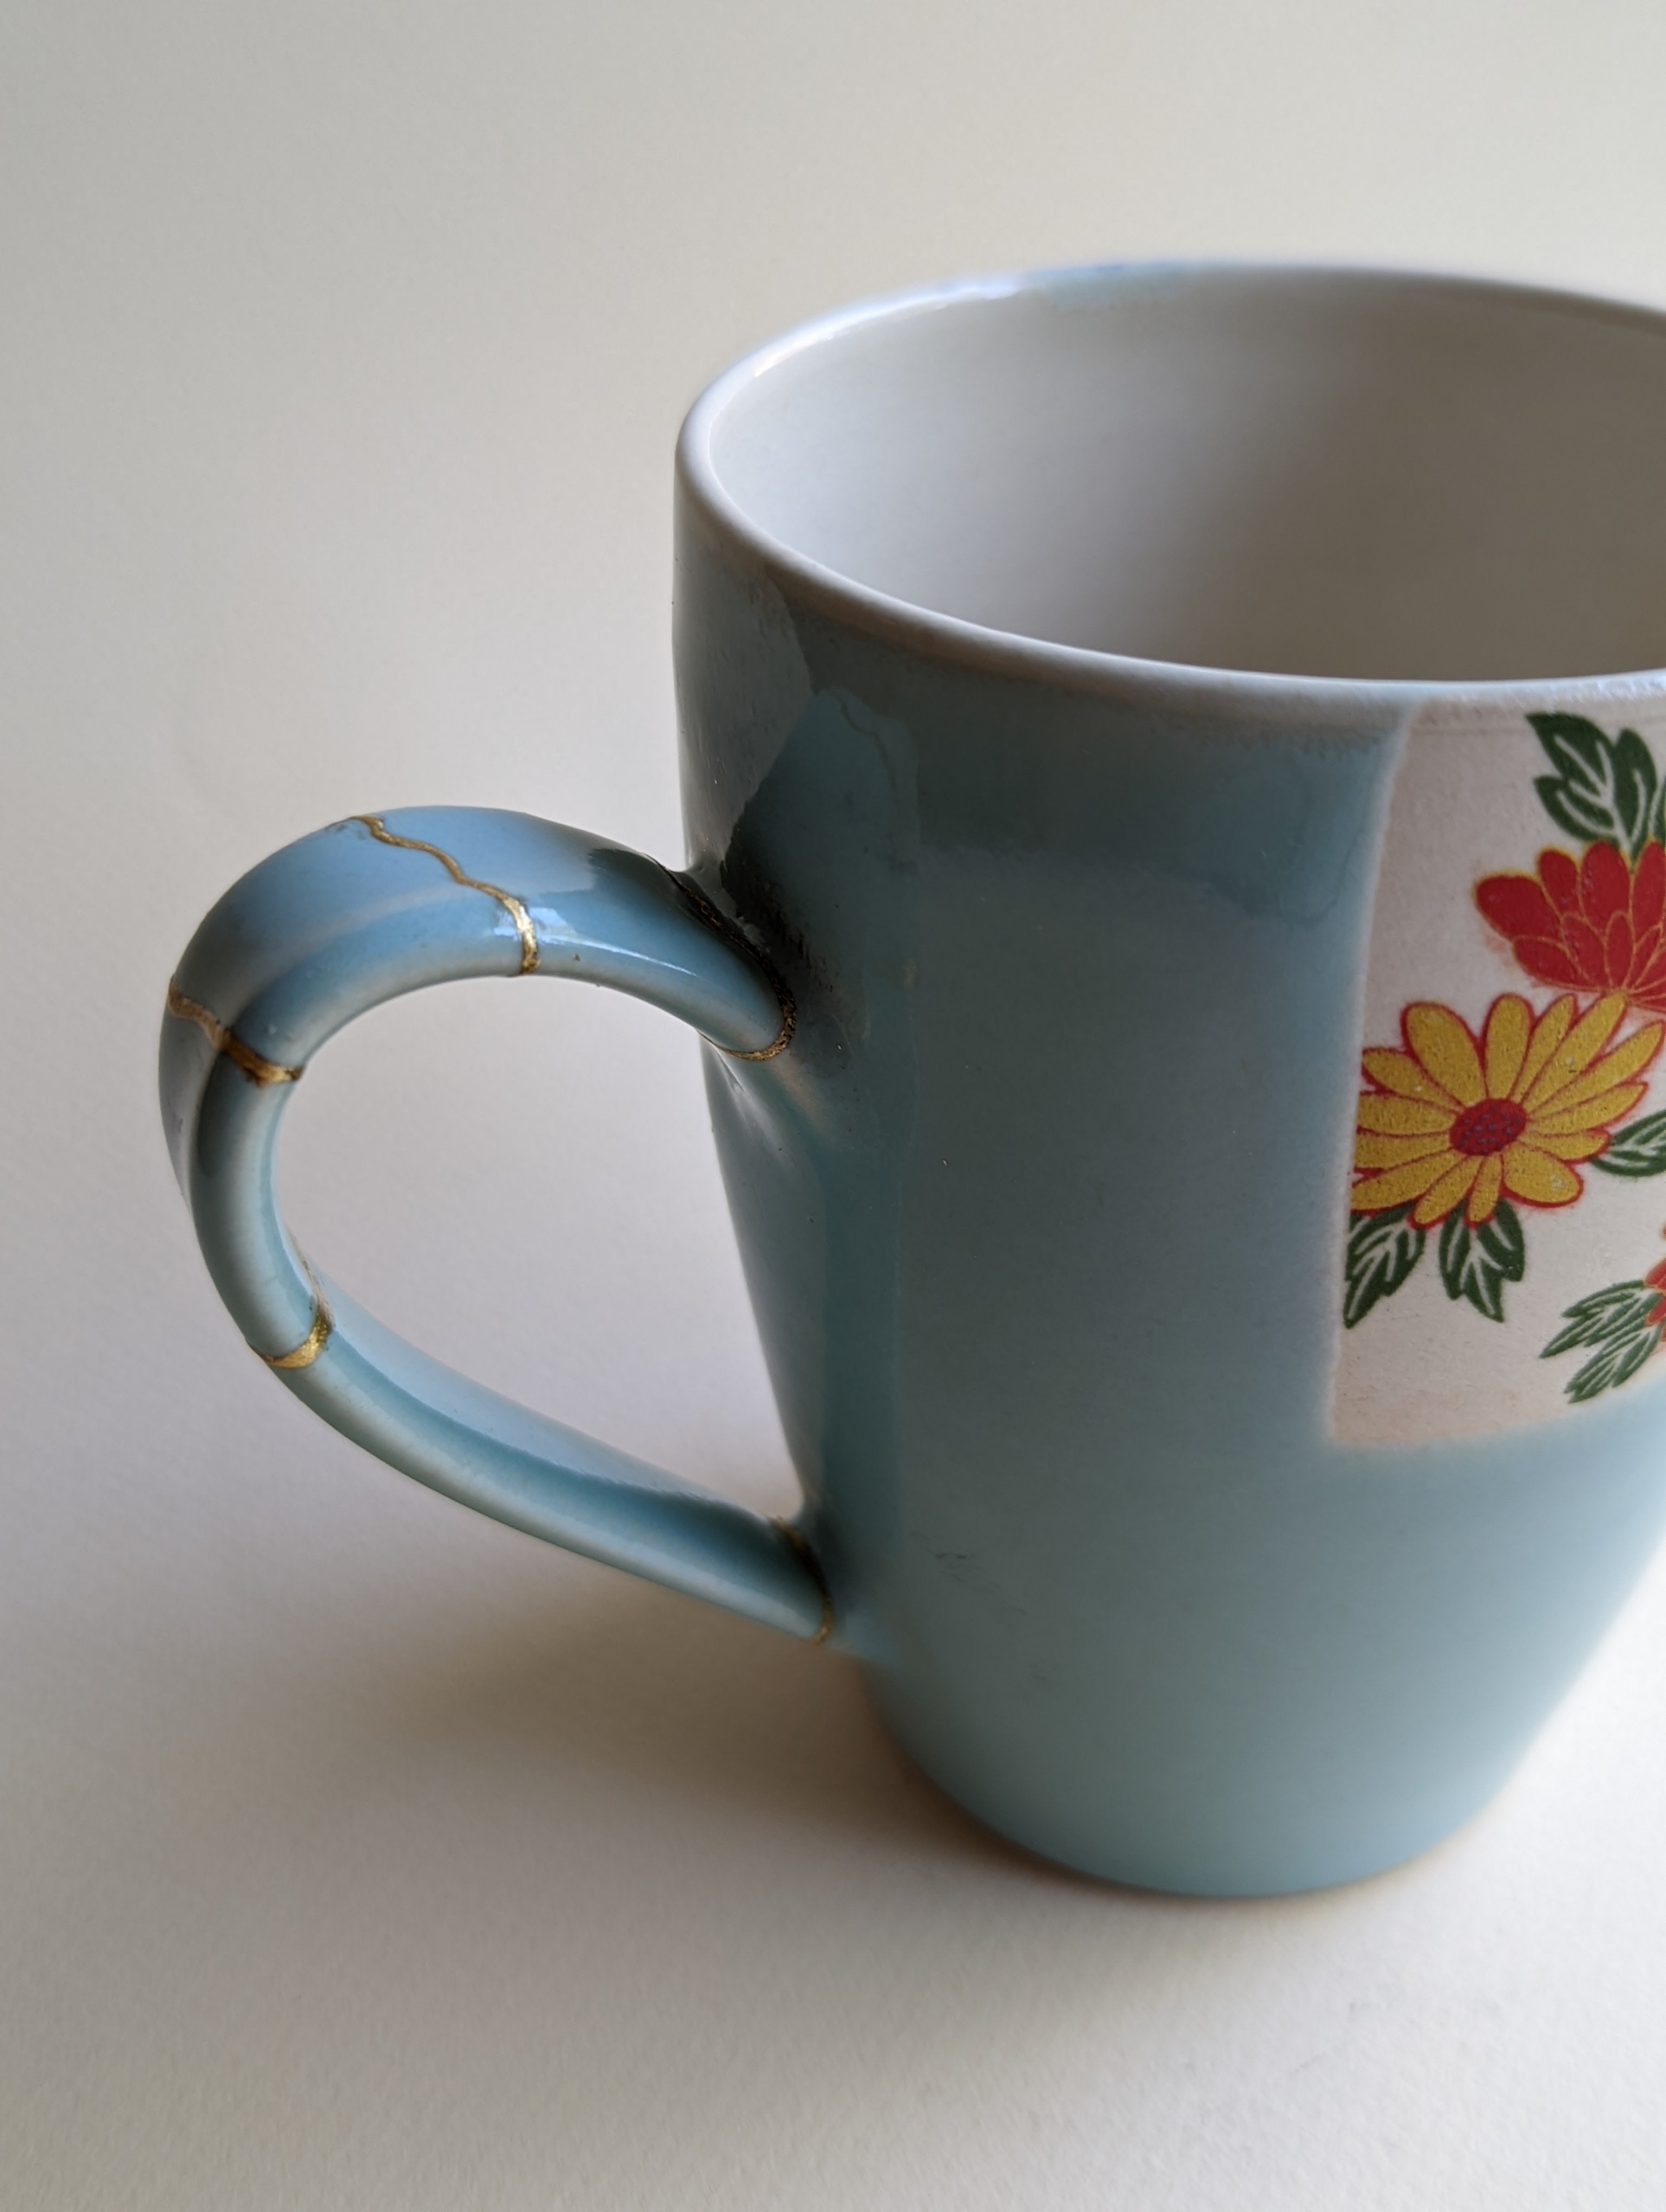 #028 Another mug for S